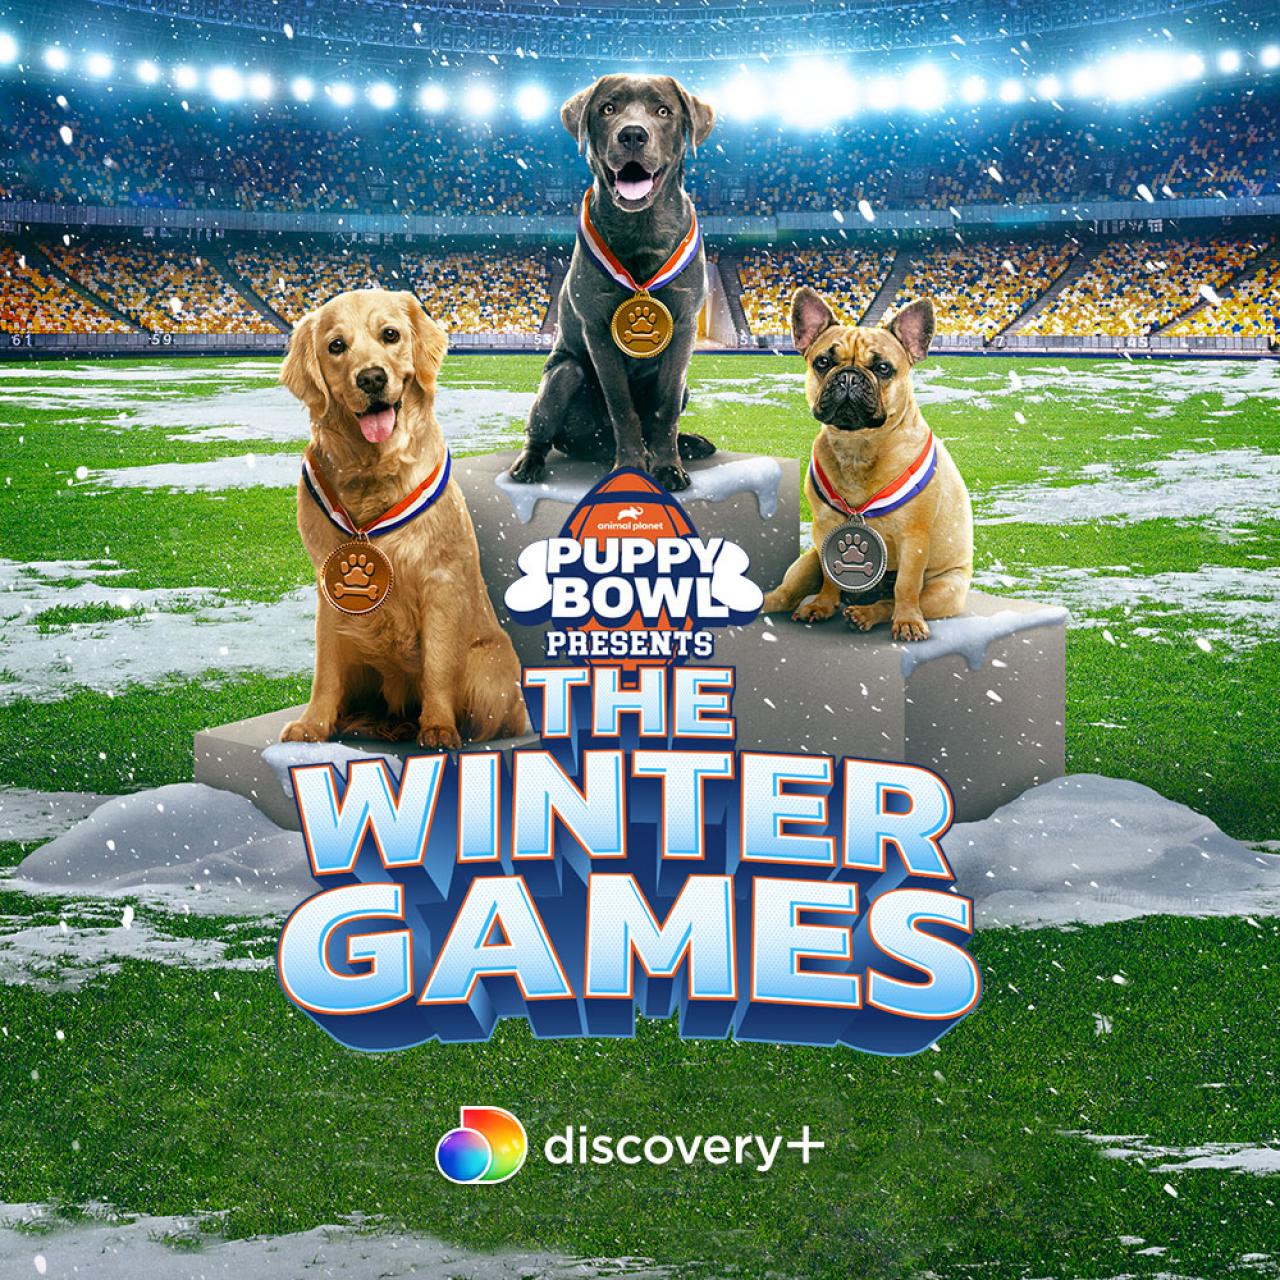 Puppy Bowl Presents: Winter Games Is All New On Discovery+ February 3, DNews